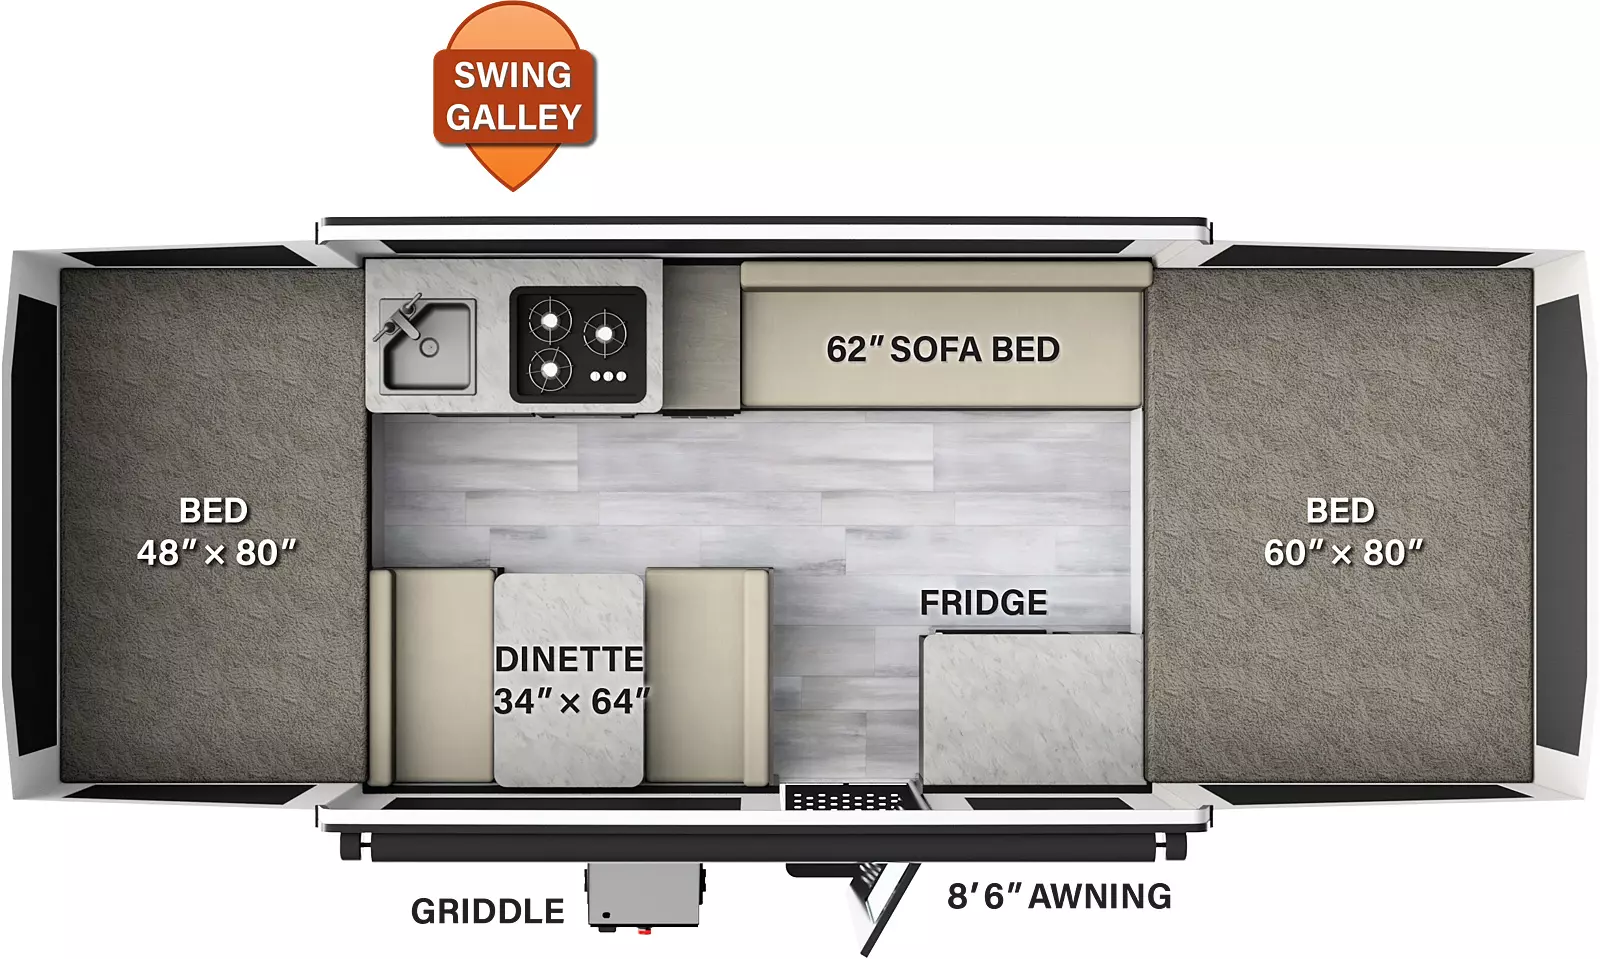 The 207SE has no slide outs and one entry door. Exterior features include a 8 foot 6 inch awning and a griddle. Interior layout from front to back: front tent bed; off-door side sofa bed, and swing galley with cooktop and sink; door side countertop with refrigerator, entry, and dinette; rear tent bed.